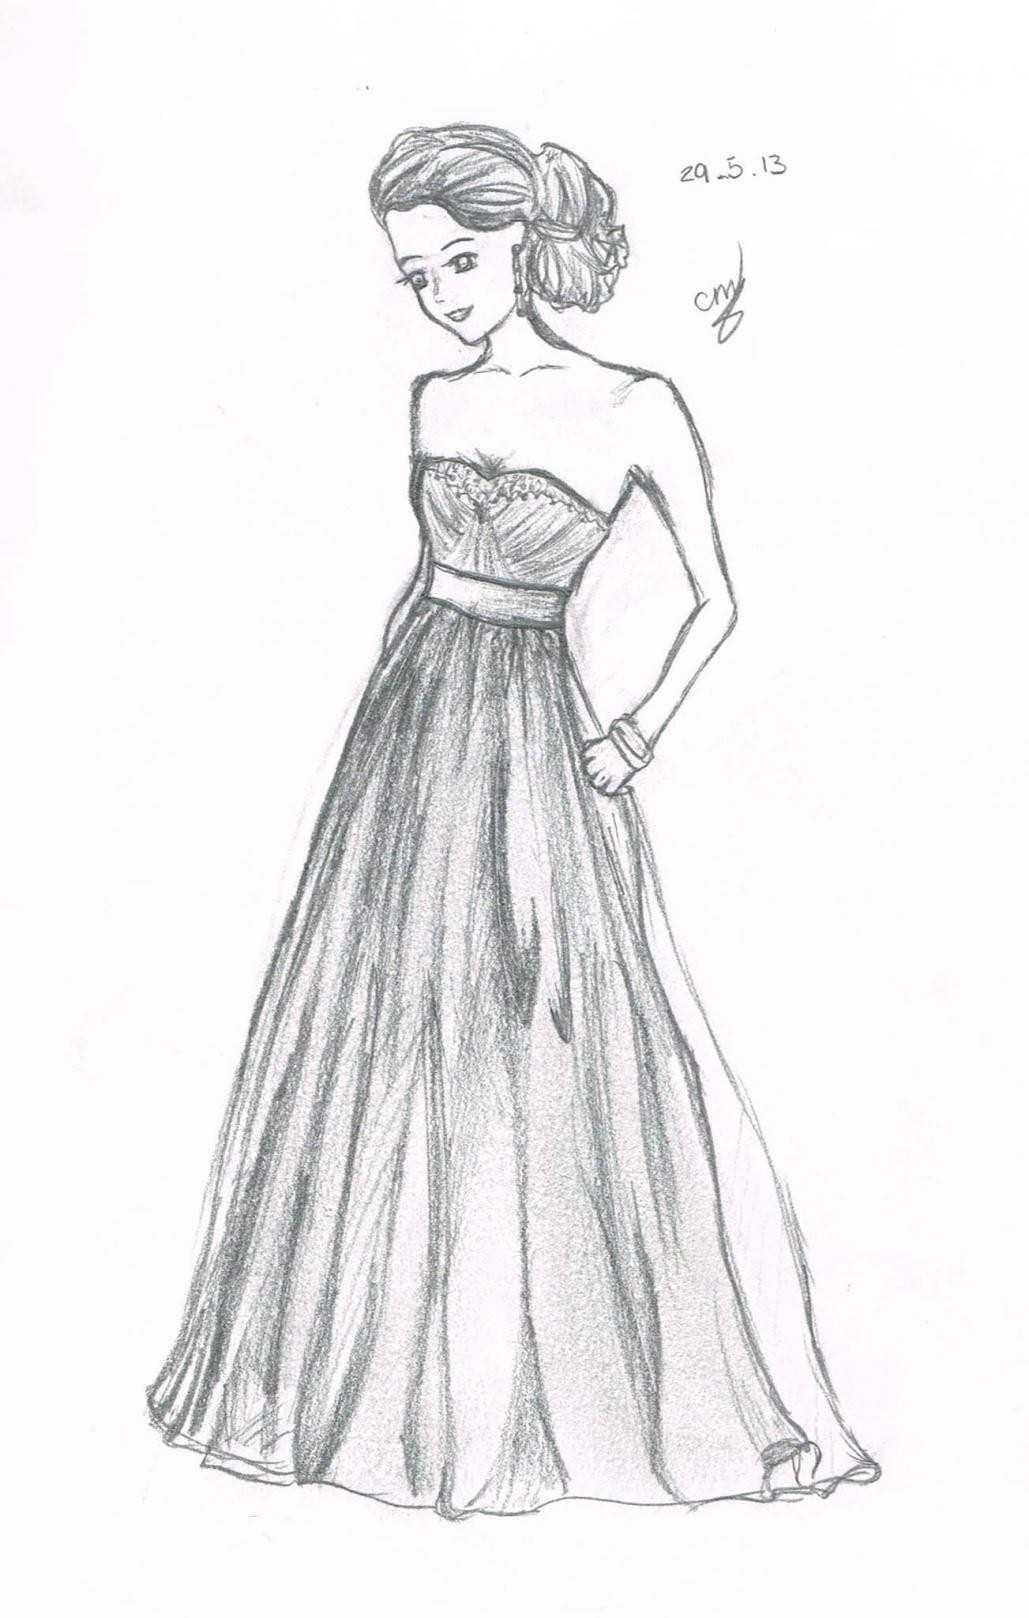 Simple Dress Sketches at Explore collection of